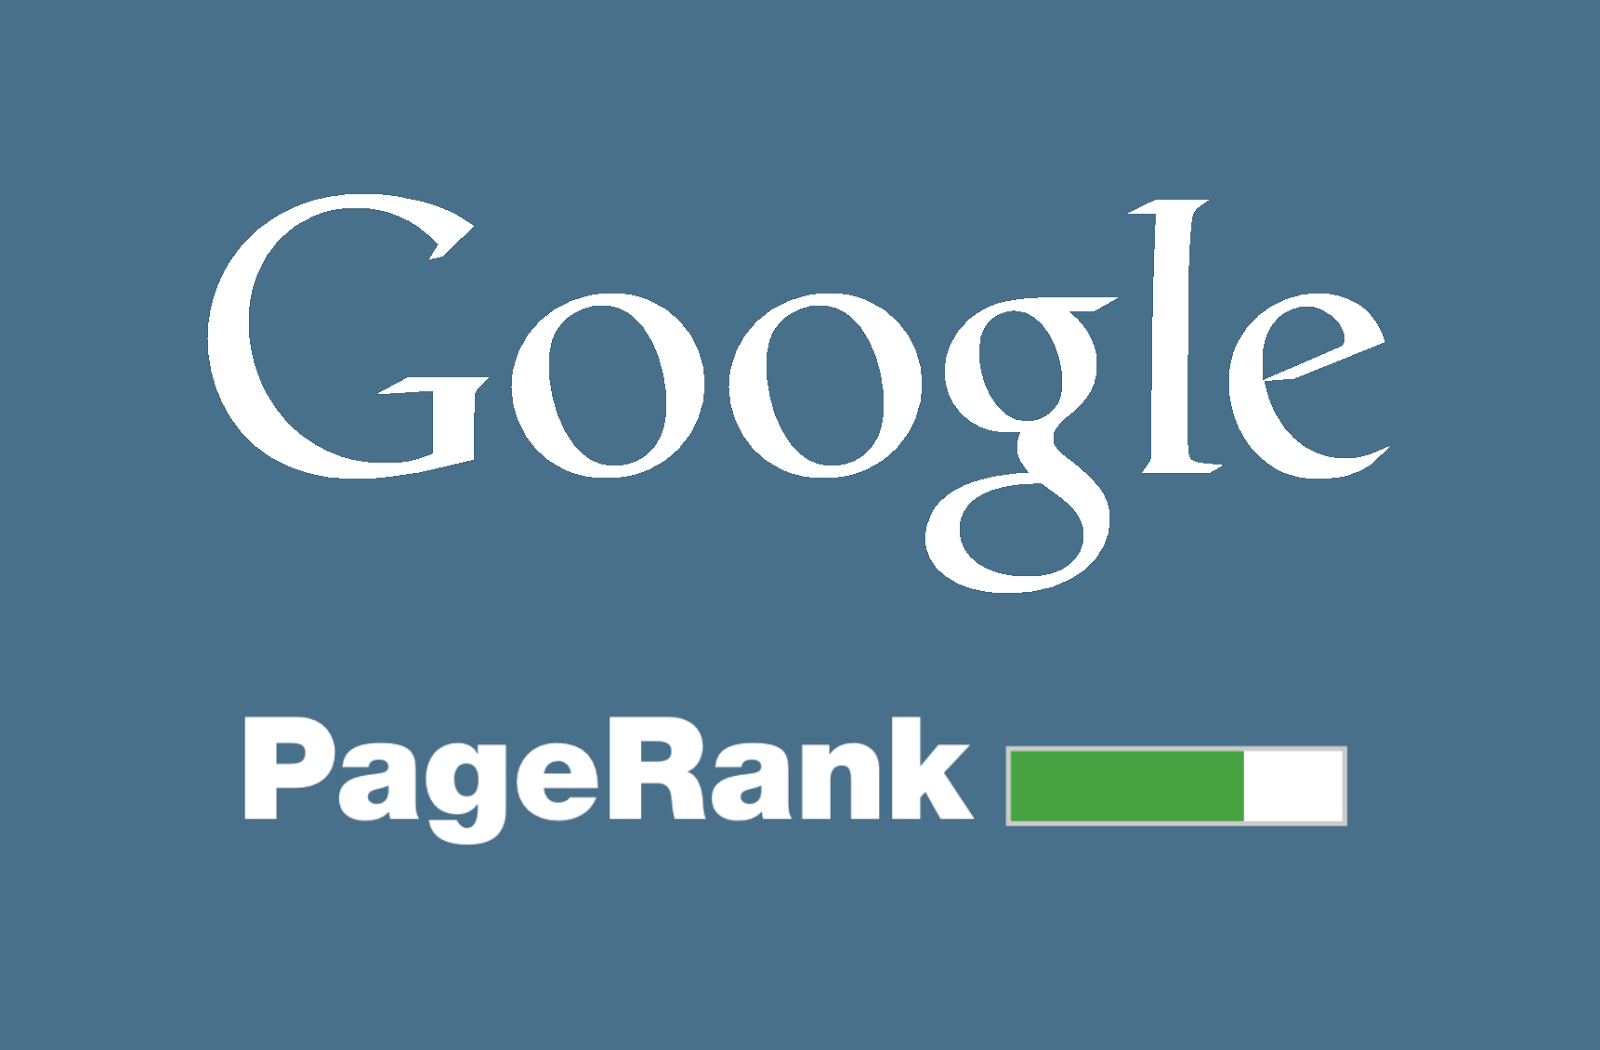 How to Improve your PageRank